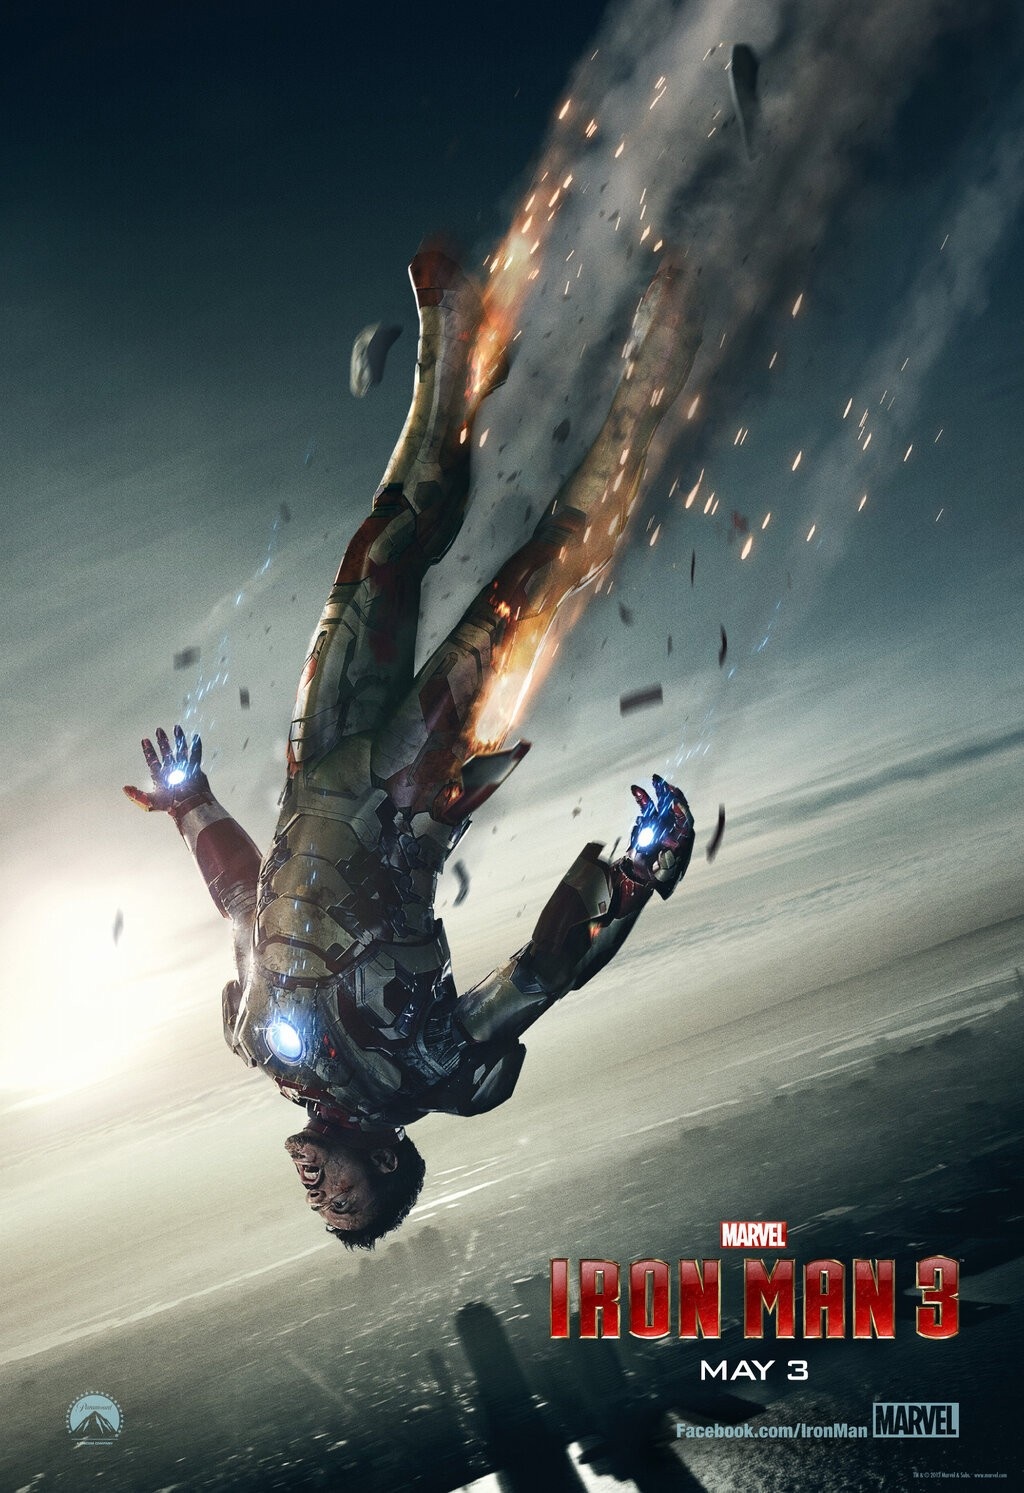 Iron Man 3 in theaters May 3, 2013